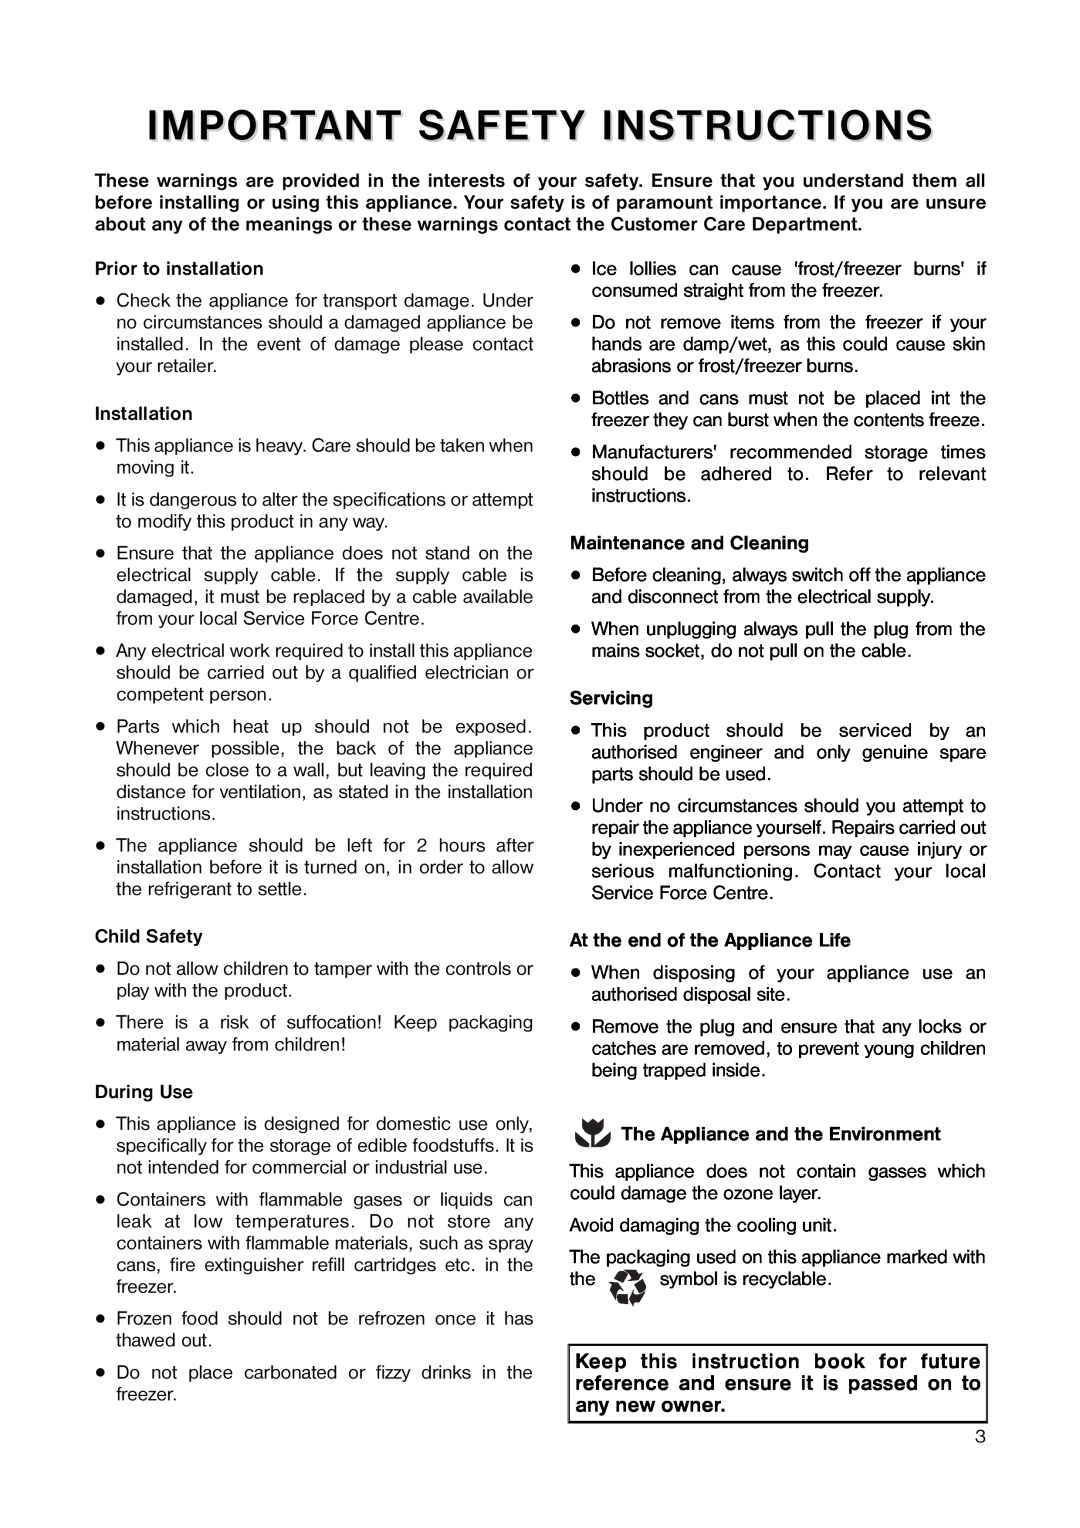 Tricity Bendix TB 42 UF Important Safety Instructions, Prior to installation, Installation, Child Safety, Servicing 